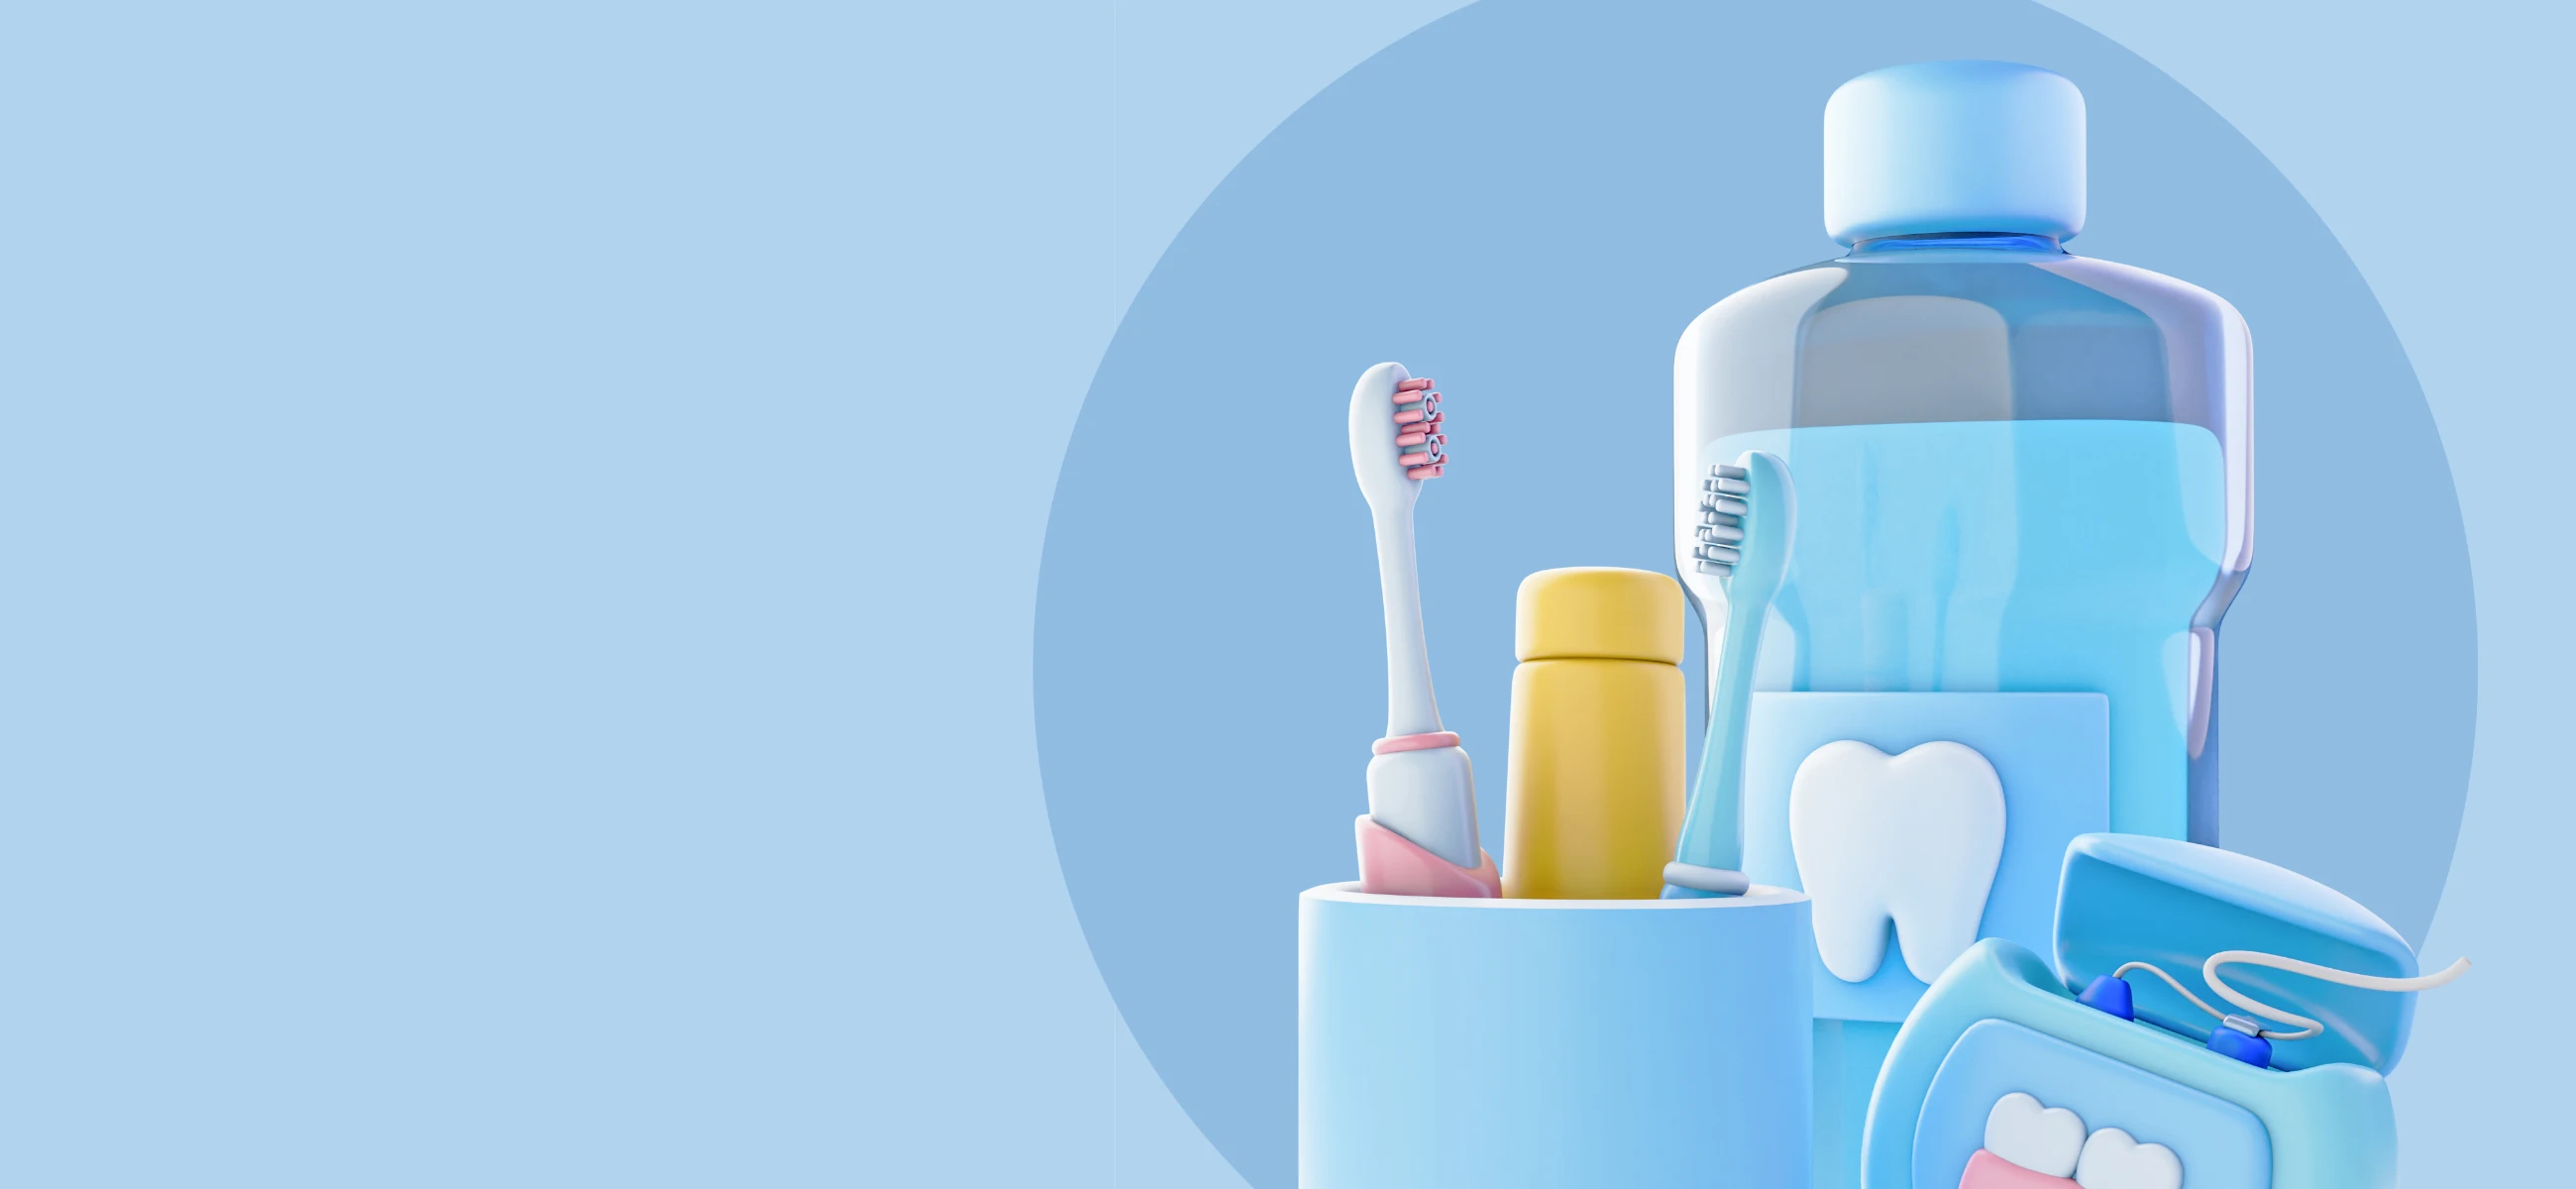 Dental health products - what do healthy teeth need